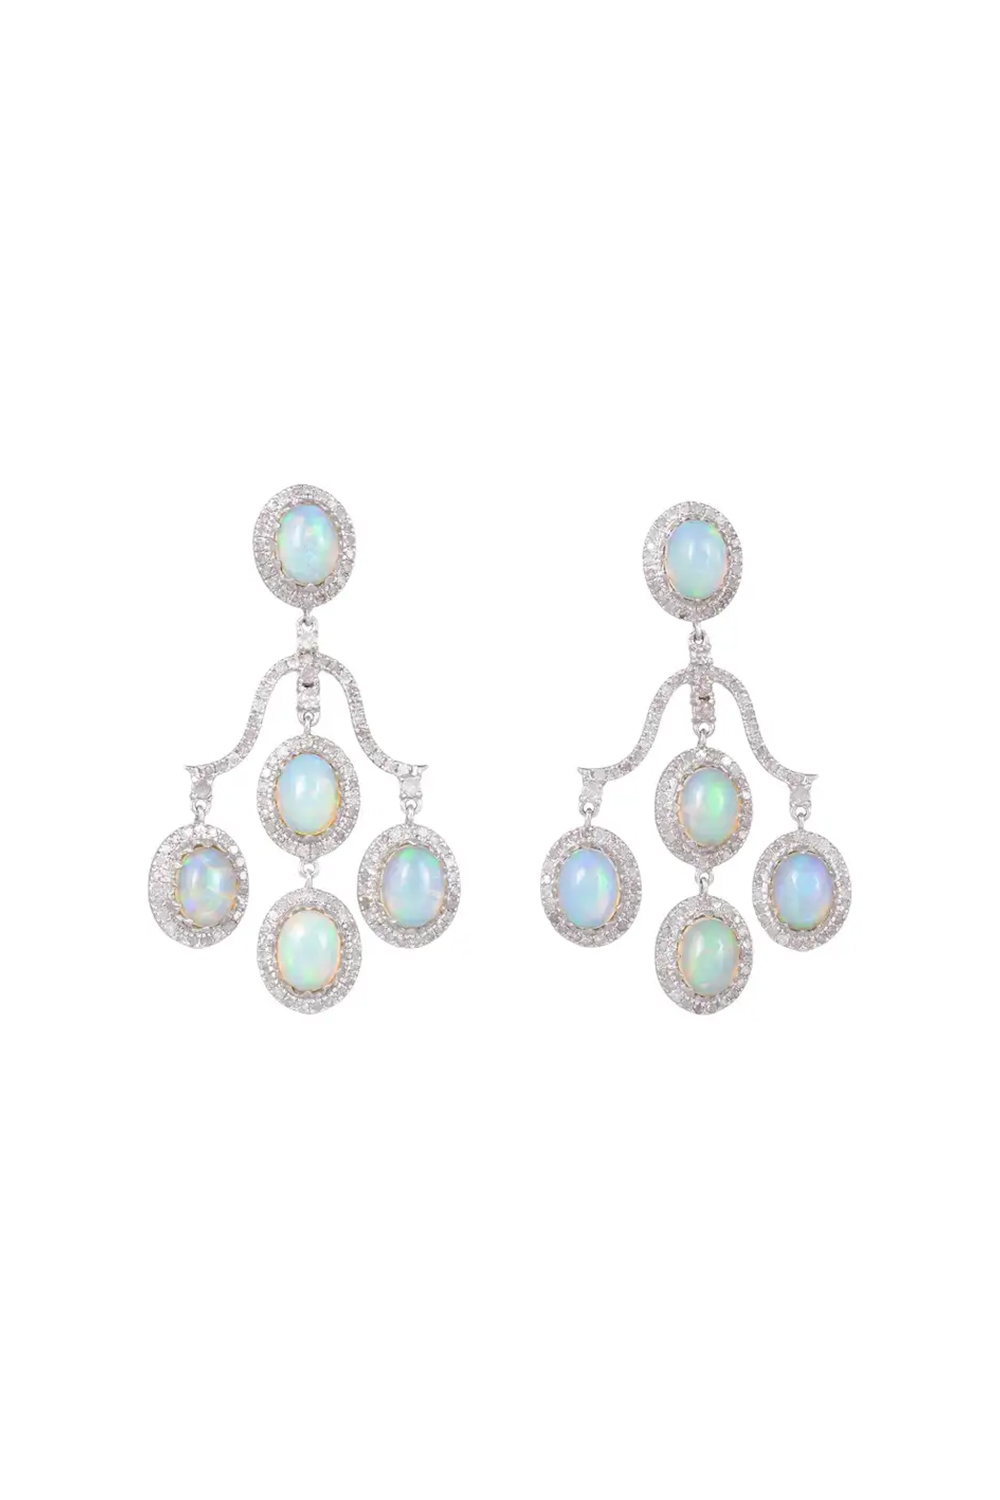 3.75 Carats Diamond and 2.52 Gms Gold and 925 Silver Diamond Opal Earrings